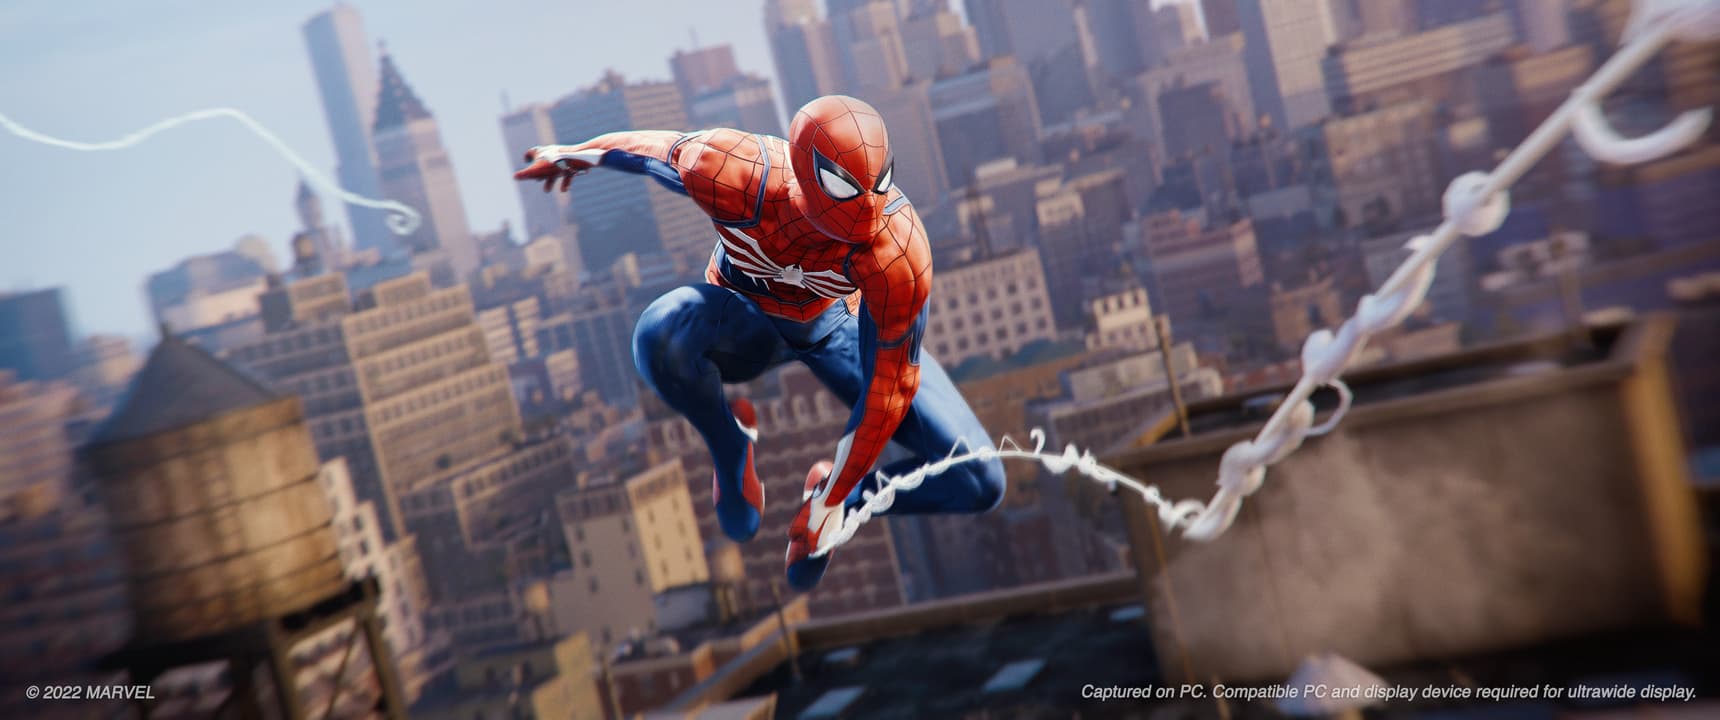 Marvel's Spider-Man Remastered Features Ultra-Wide Swing